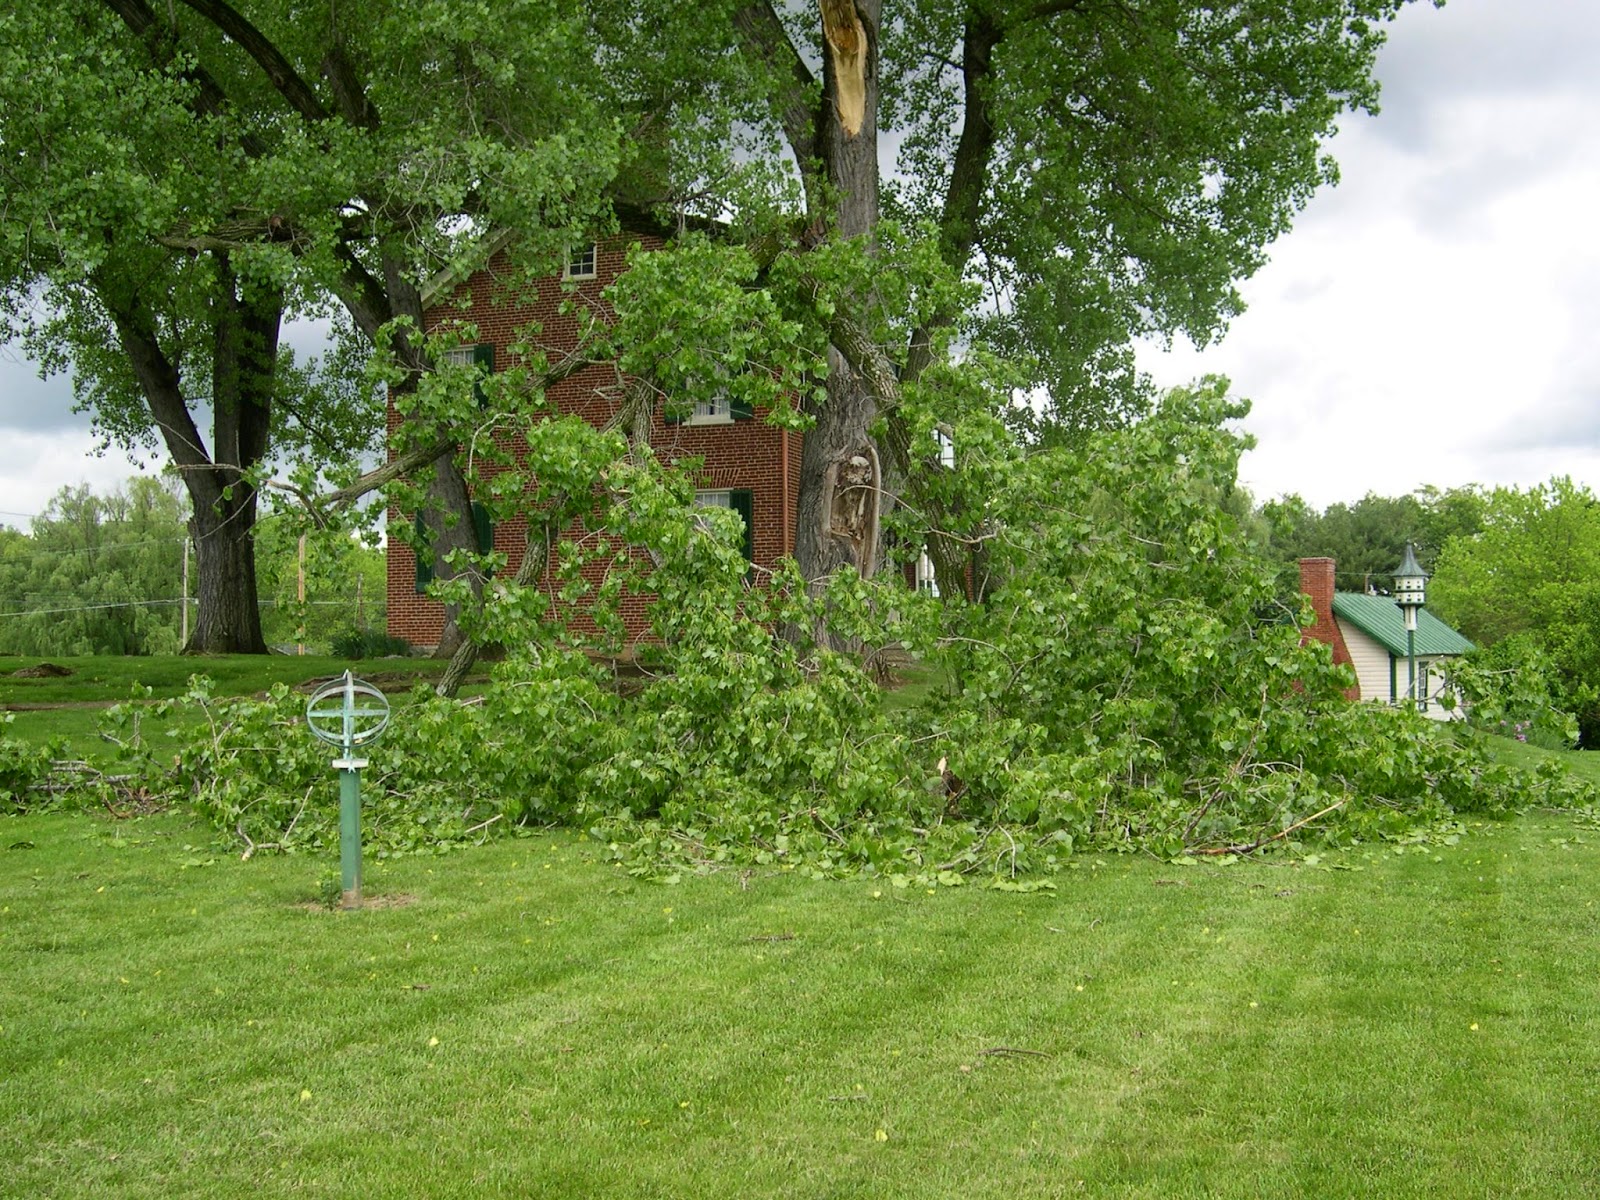 Groshs Lawn Service Tree Storm Damage Clean Up Hagerstown Md